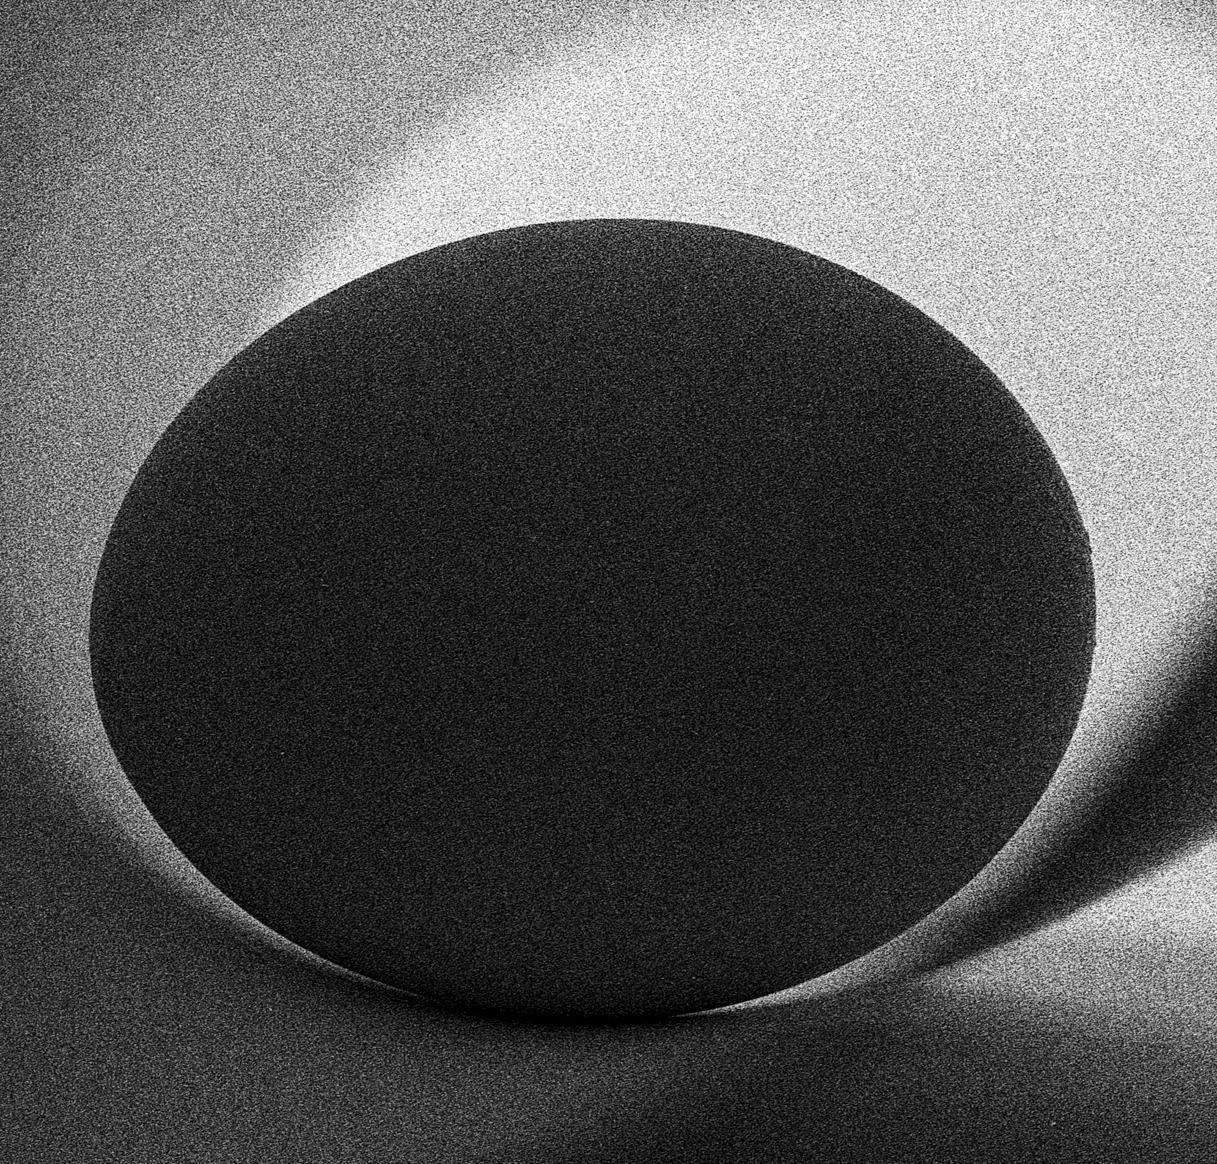 Egg Study 1. Still Life . Black and White Silver Gelatin Print - Photograph by Shine Huang